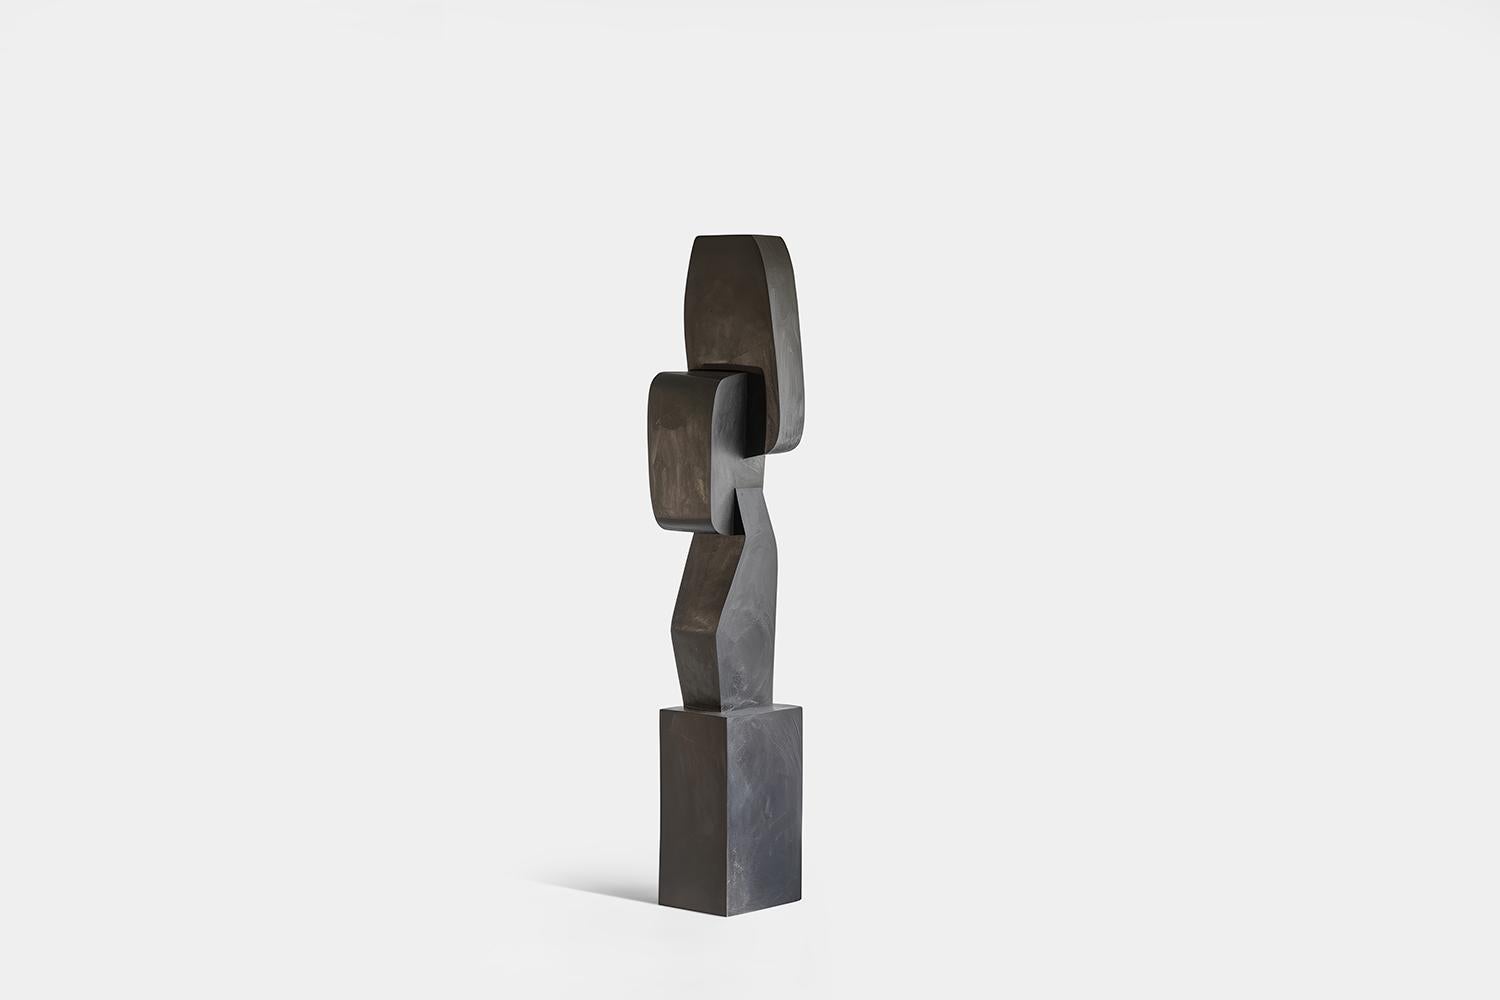 Biomorphic Carved Wood Sculpture in the style of Isamu Noguchi, Unseen Force 23 by Joel Escalona


This monolithic sculpture, designed by the talented Artist Joel Escalona, is a towering example of beauty in craftsmanship. Hand and digital machine